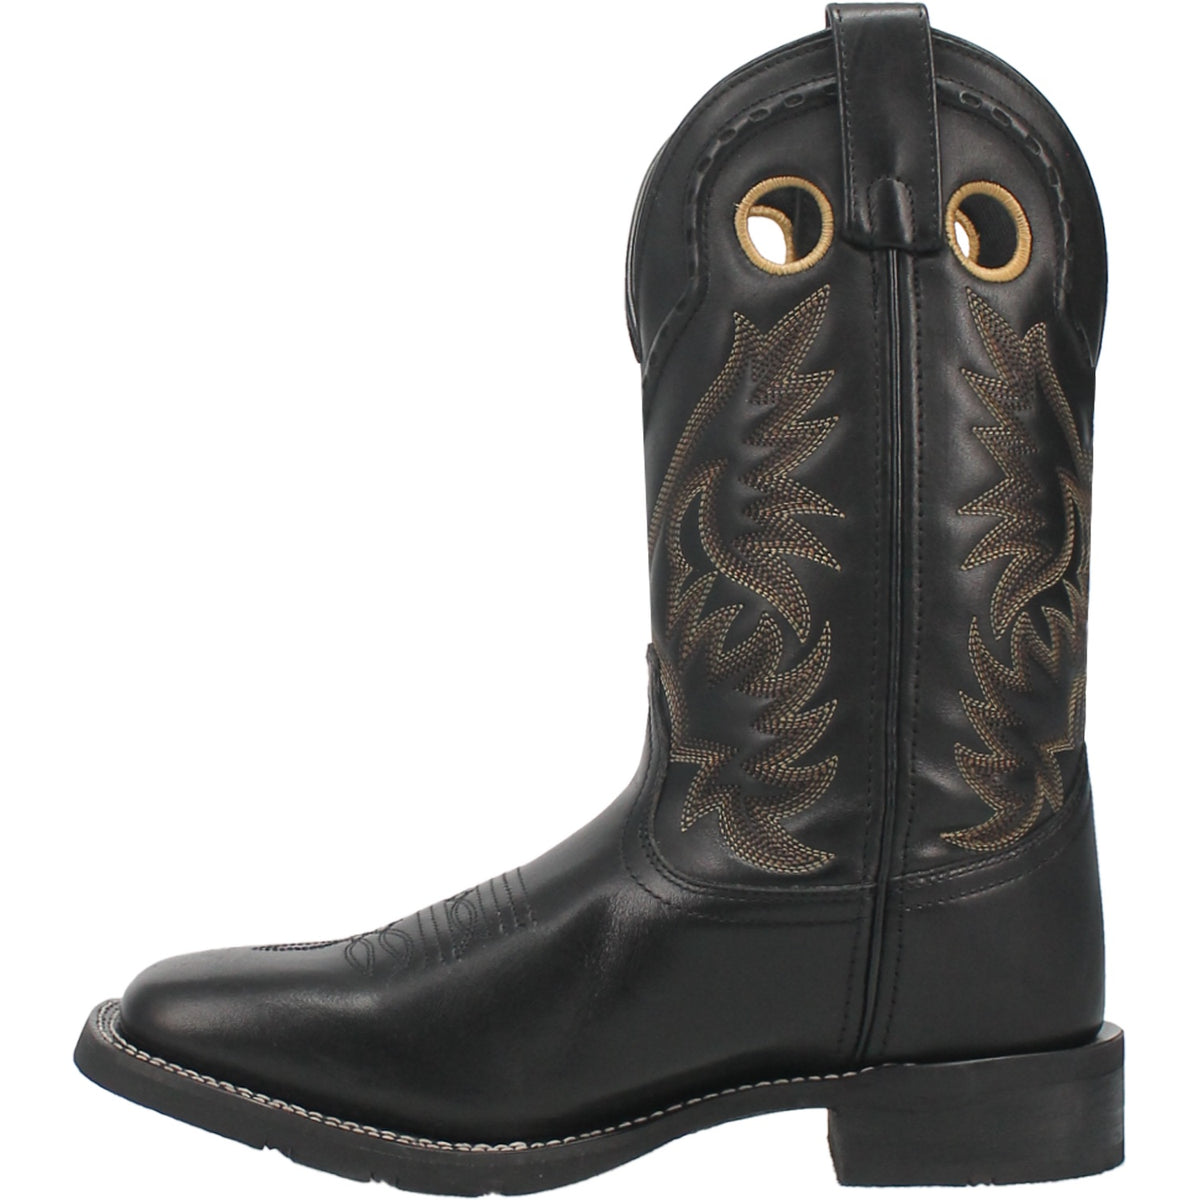 KANE LEATHER BOOT Cover